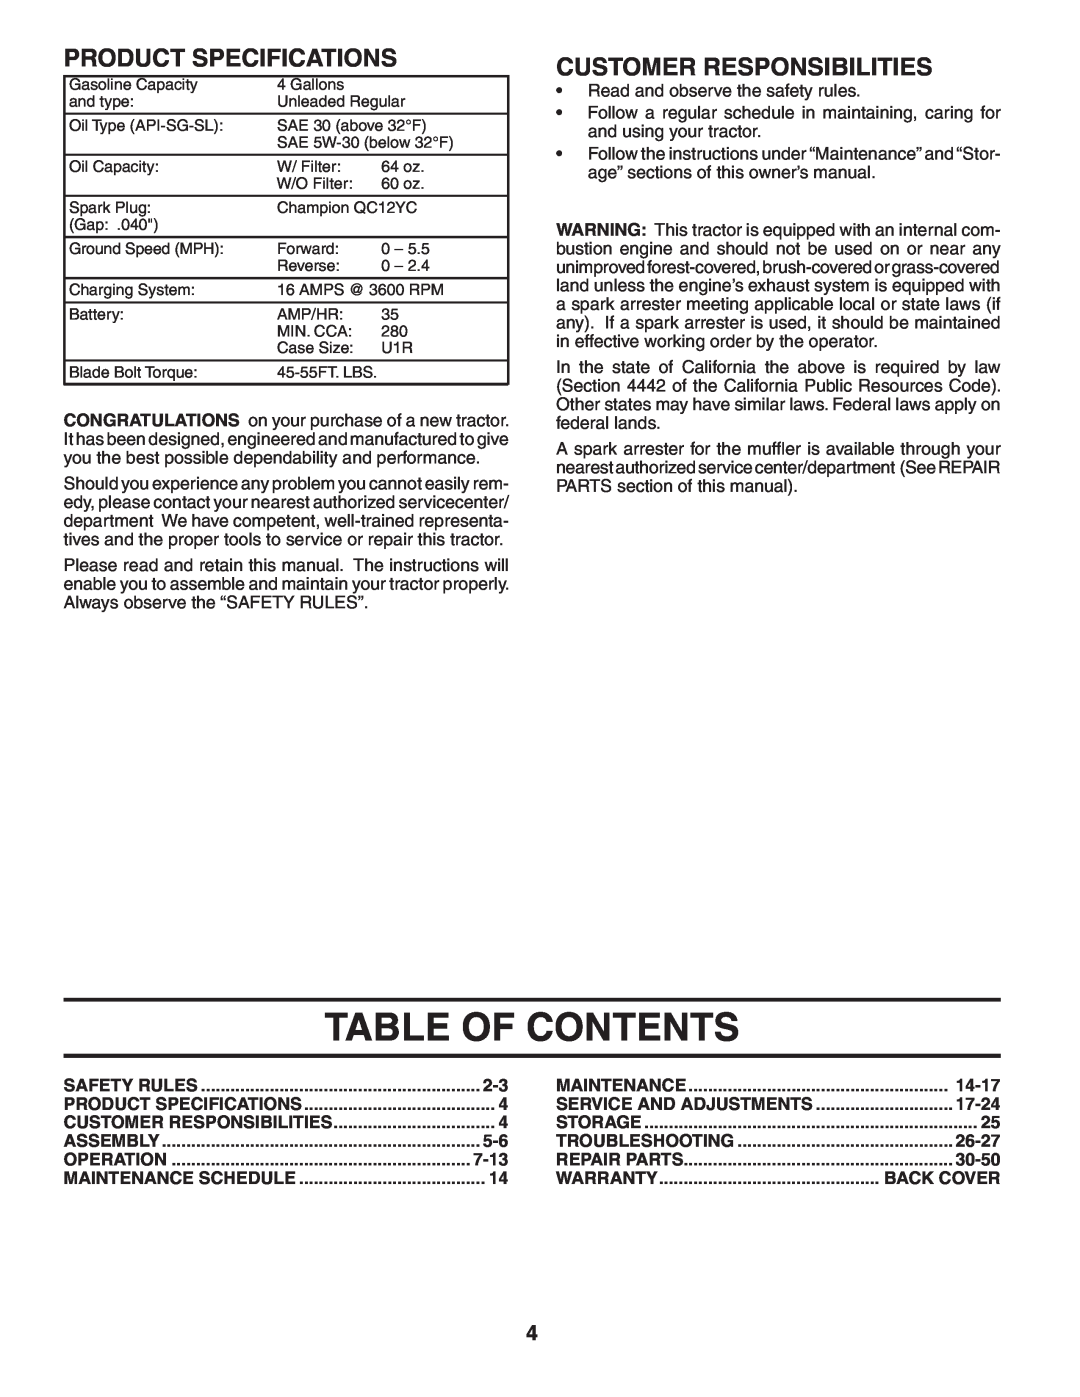 Husqvarna YTH2448T owner manual Table Of Contents, Product Specifications, Customer Responsibilities 